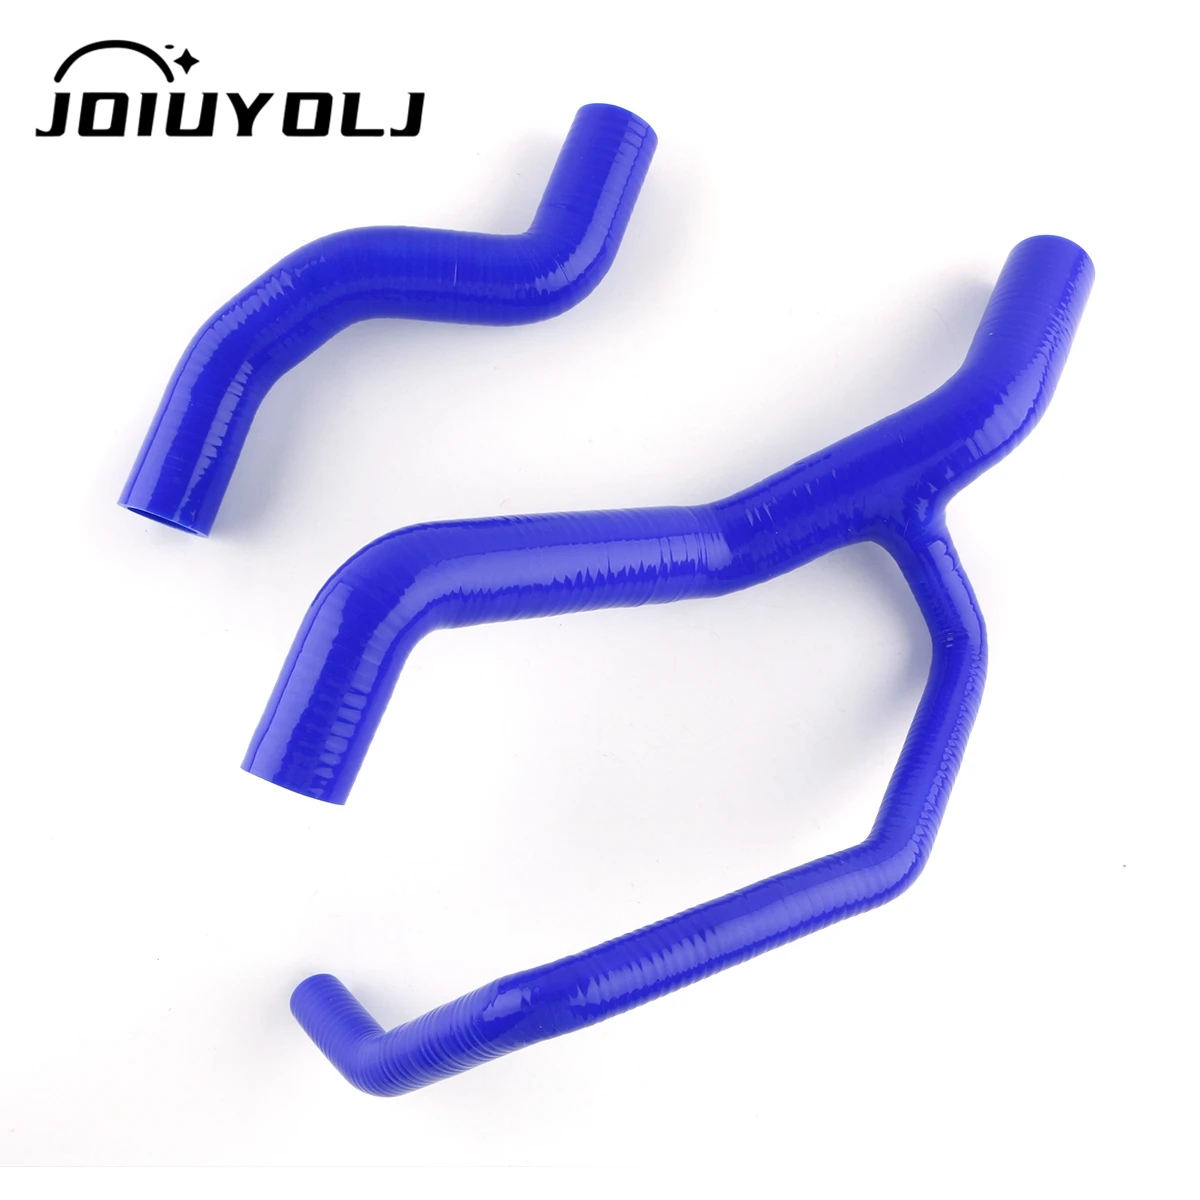 

Silicone Radiator Coolant Hose Kit For FIAT PUNTO GT 1.4 GT TURBO 1993 1994 1995 1996 1997 1998 1999